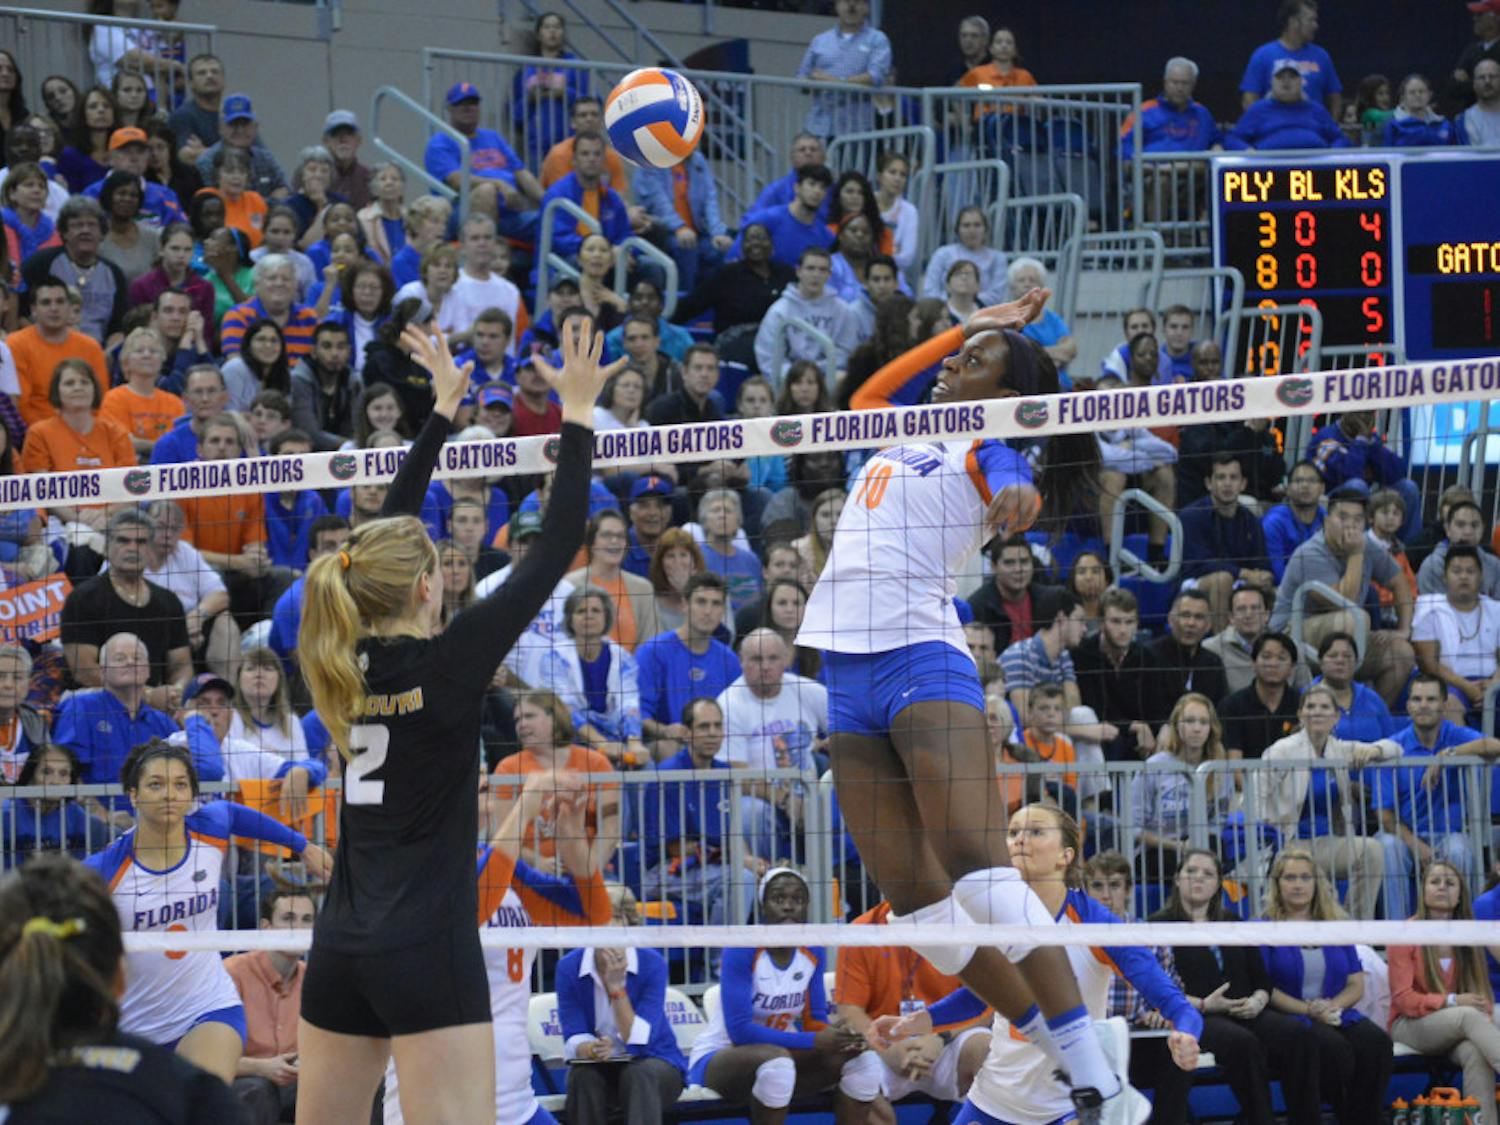 Redshirt senior middle blocker Chloe Mann swings during the Gators' 3-0 loss to the Tigers on Nov. 15, 2013, in the O'Connell Center. Mann paced the Gators with a .506 hitting percentage in 2013 en route to becoming the NCAA career hitting percentage leader with her .476 clip.